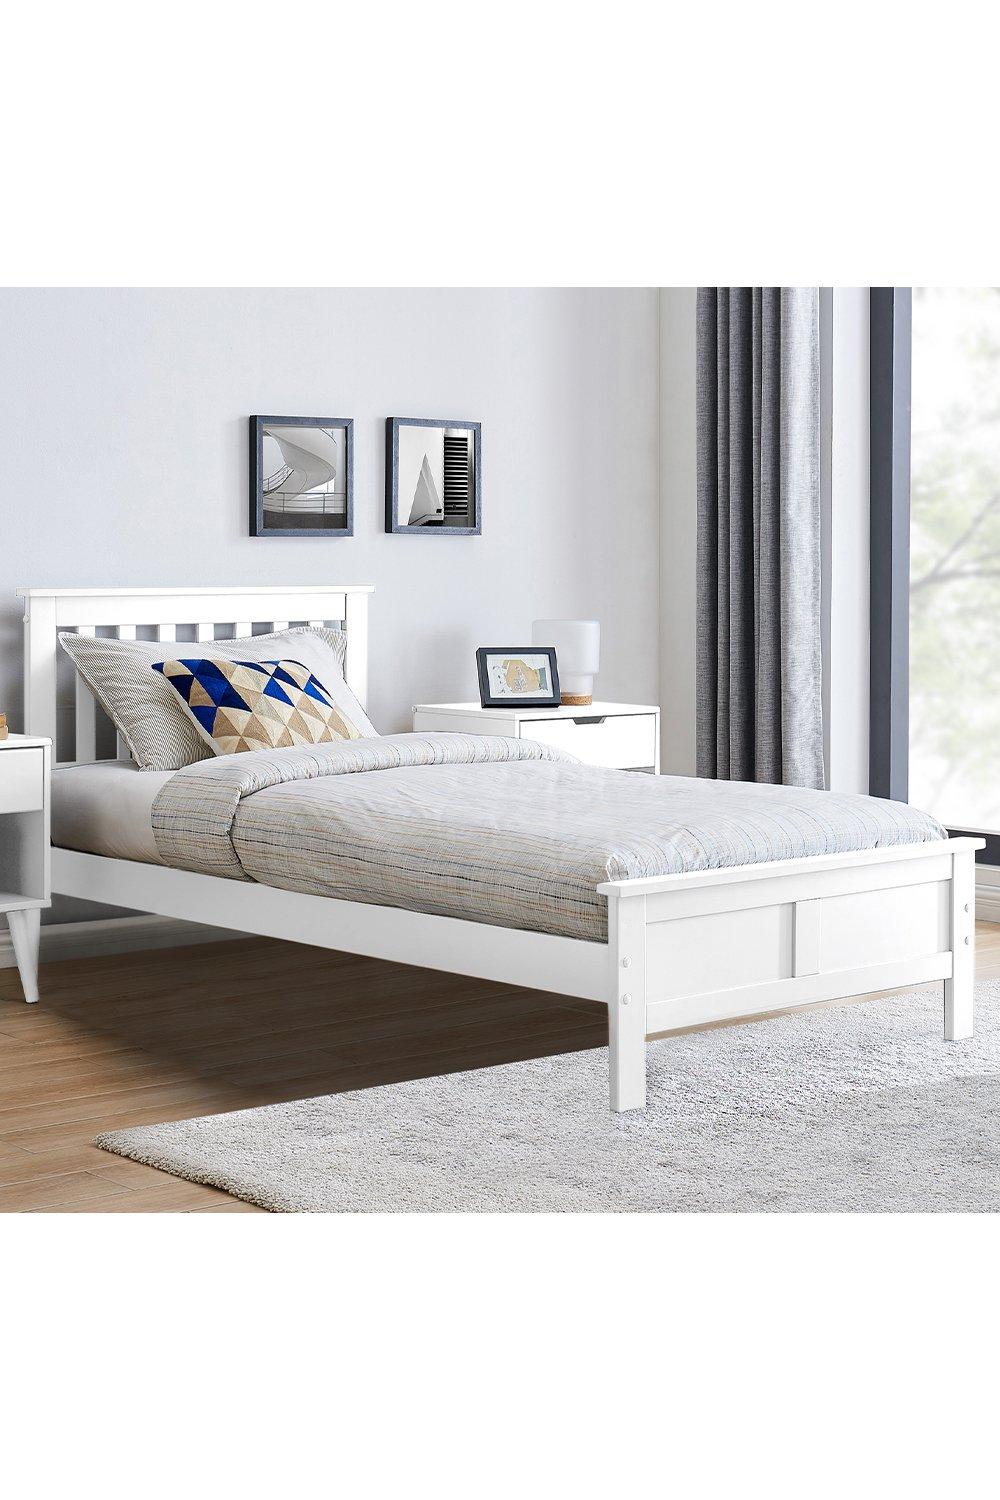 azure white wooden solid pine quality double bed frame (bed frame only) modern simple design